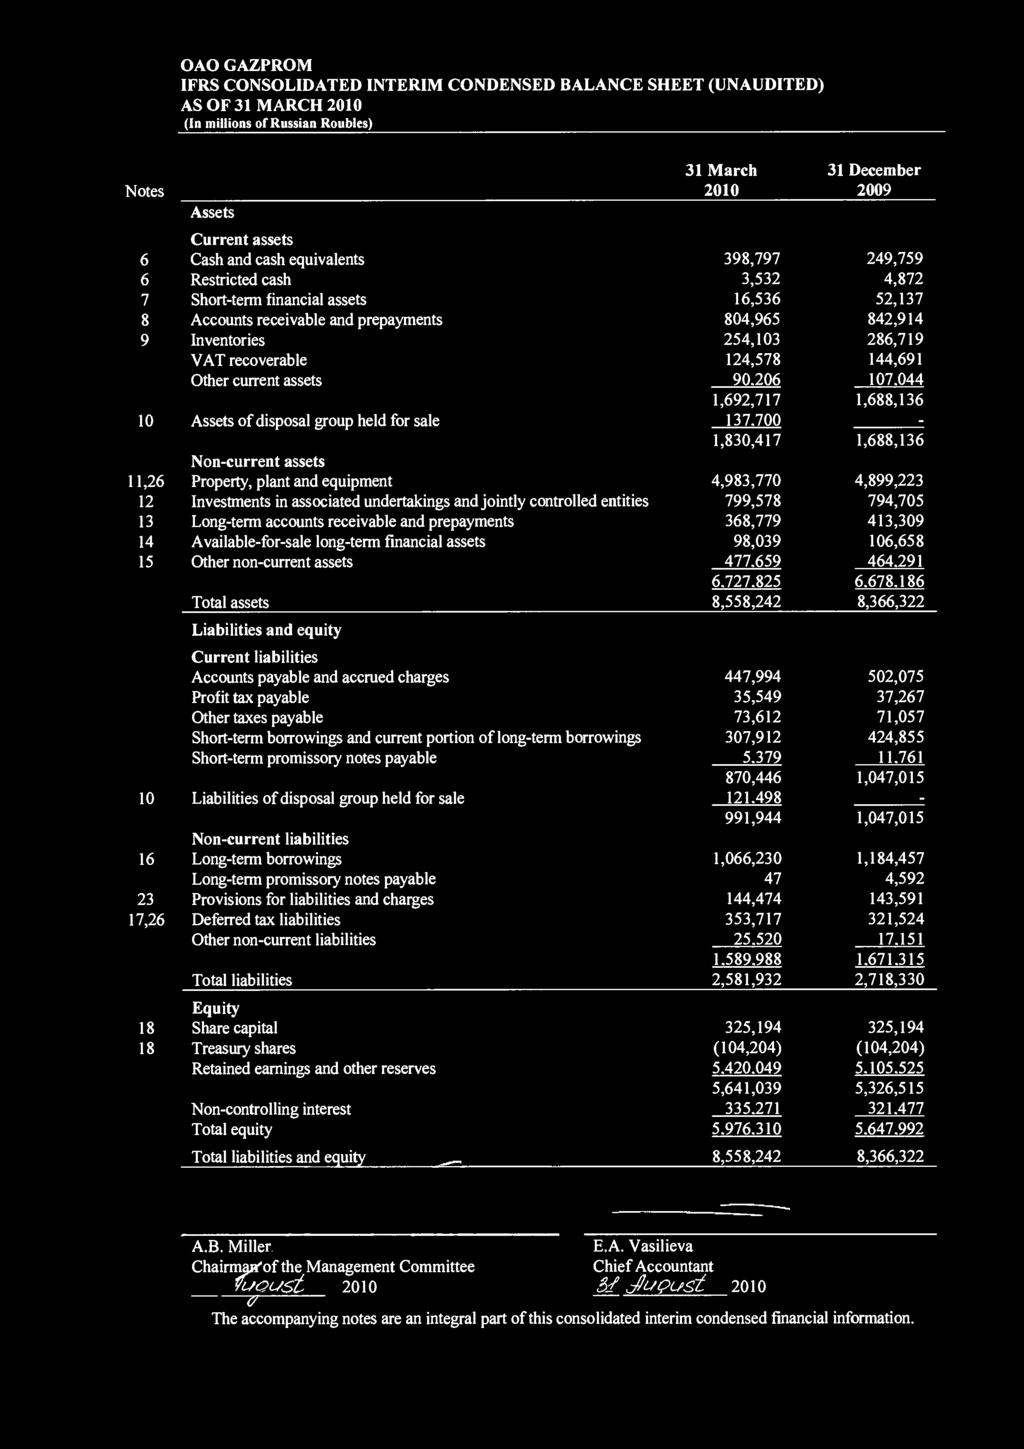 IFRS CONSOLIDATED INTERIM CONDENSED BALANCE SHEET (UNAUDITED) AS OF 31 MARCH 2010 Notes Assets 31 March 2010 31 December 2009 Current assets 6 Cash and cash equivalents 398,797 249,759 6 Restricted